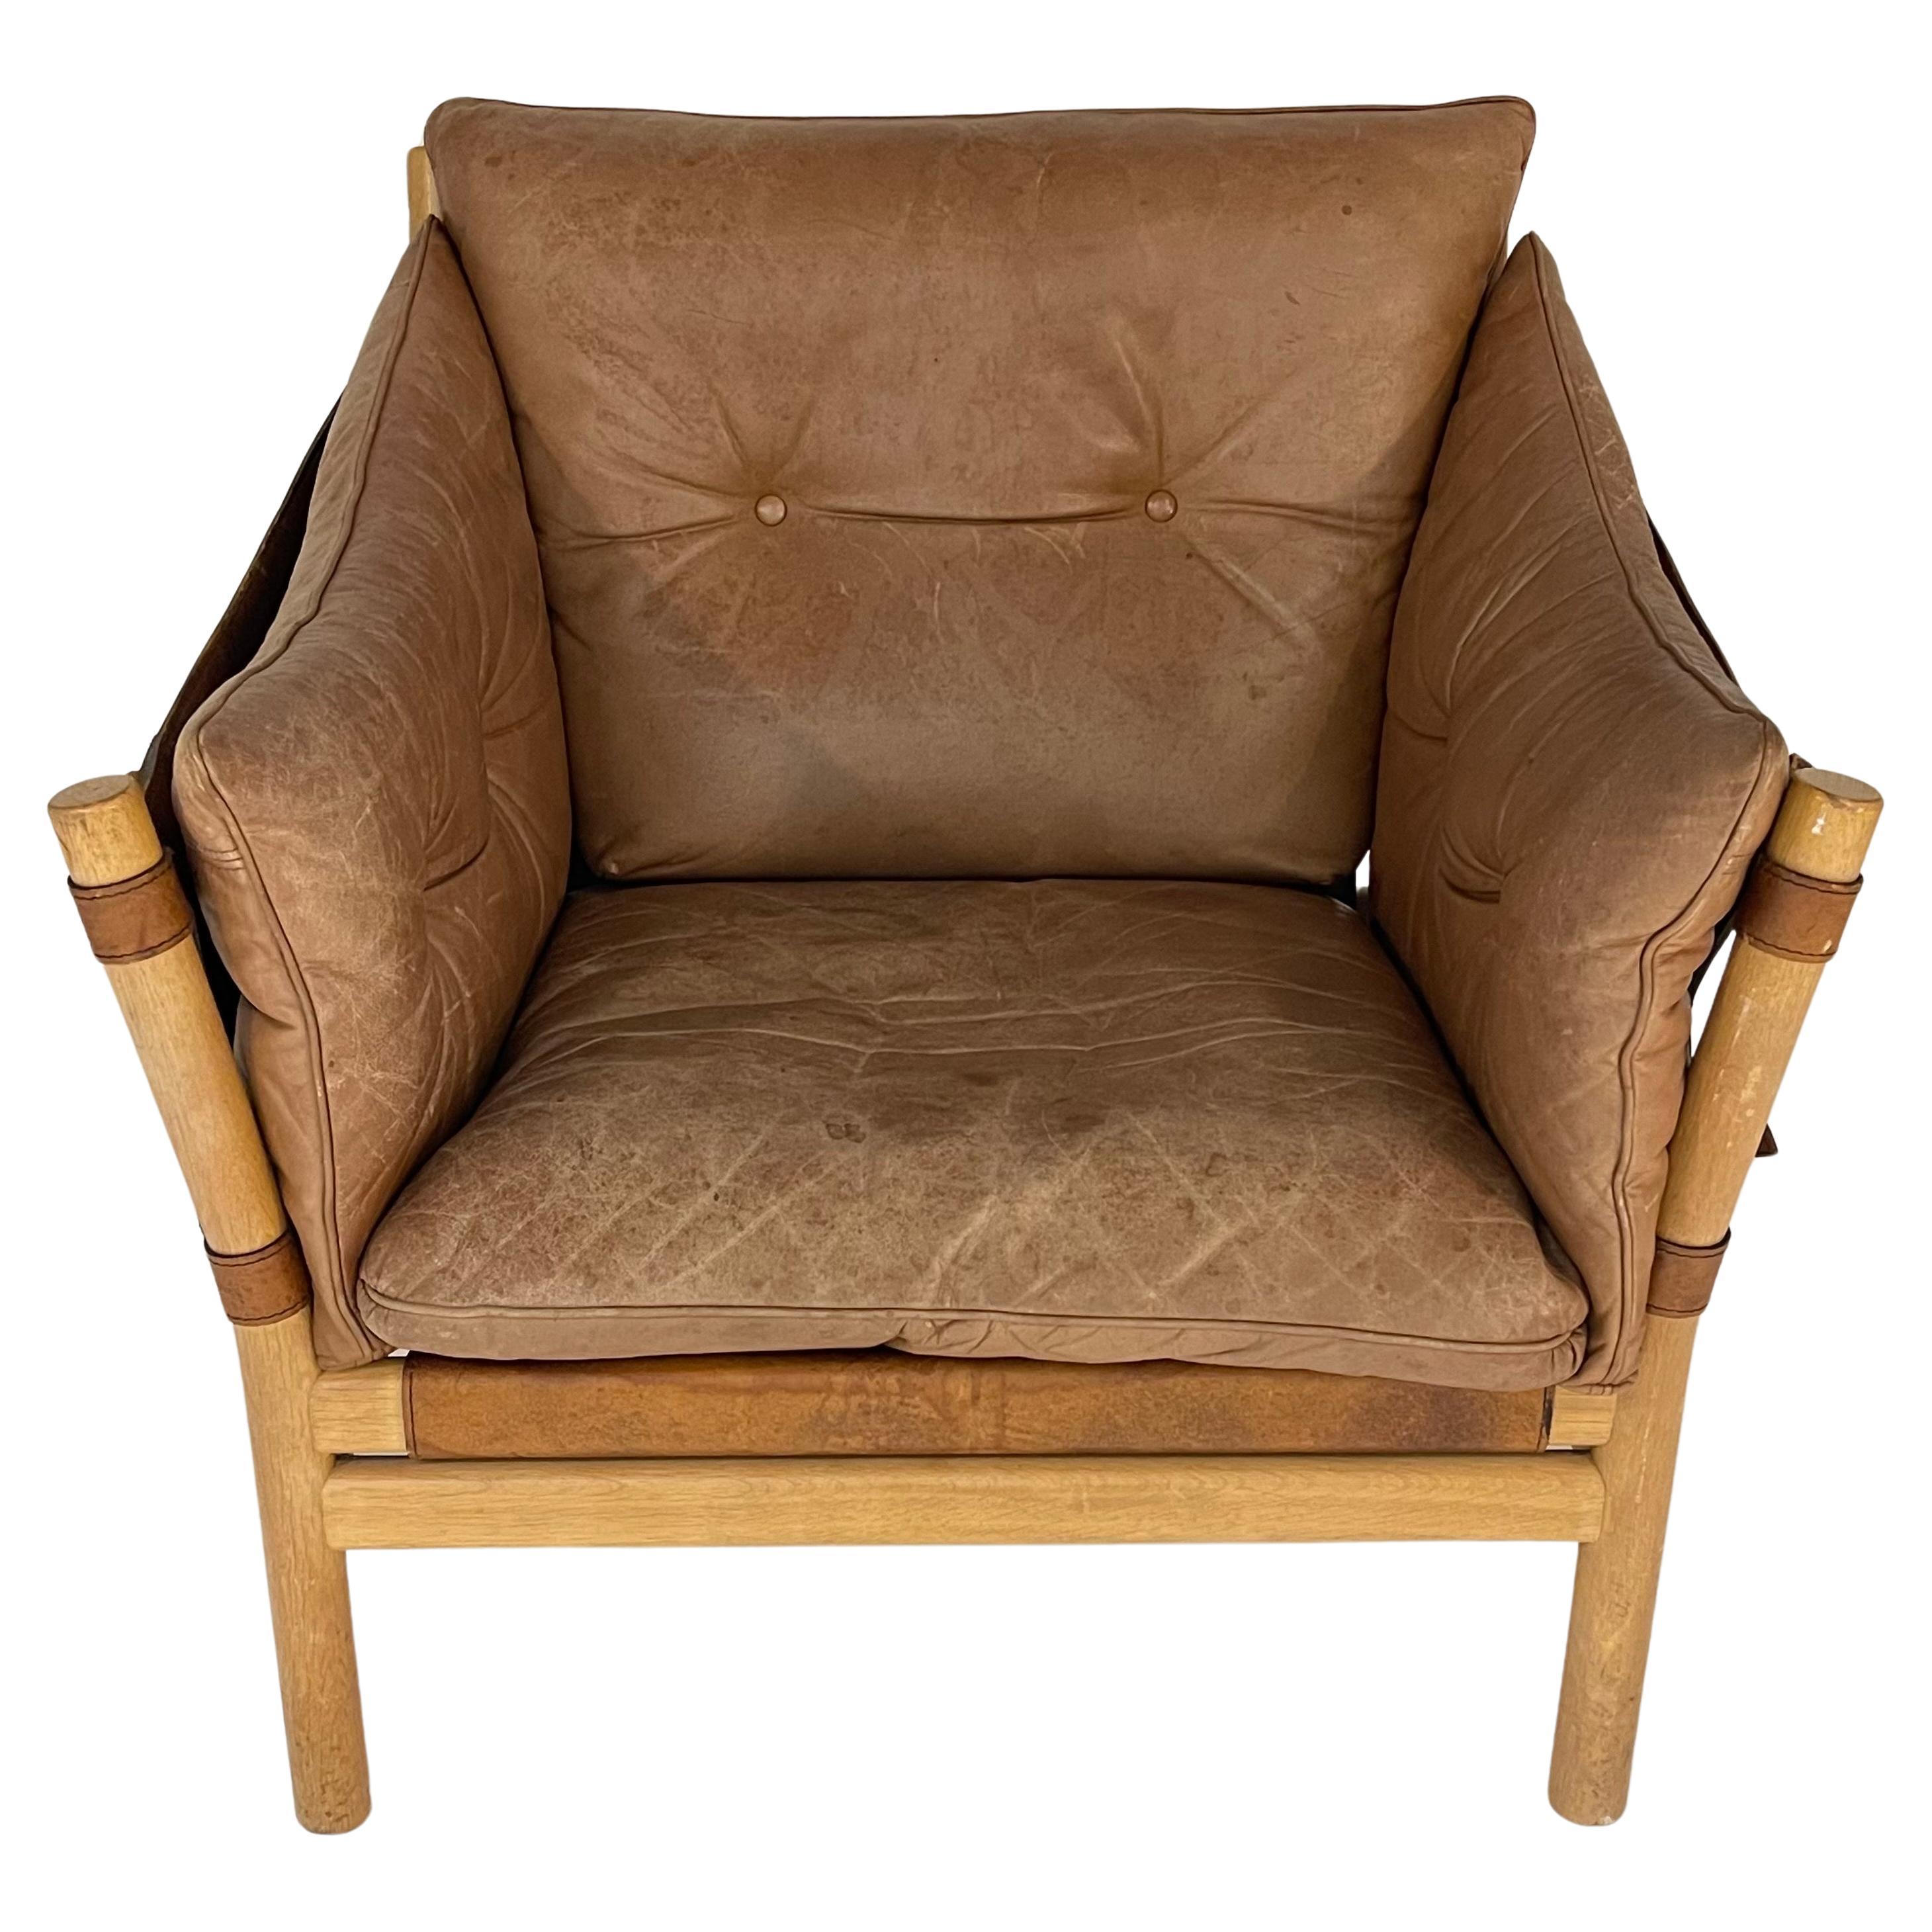 Rare Ilona campaign safari chair rendered in a turned oak frame with cognac leather back, side, buckle straps and button removable loose cushions.  Designed by Arne Norell, Sweden, 1970s.